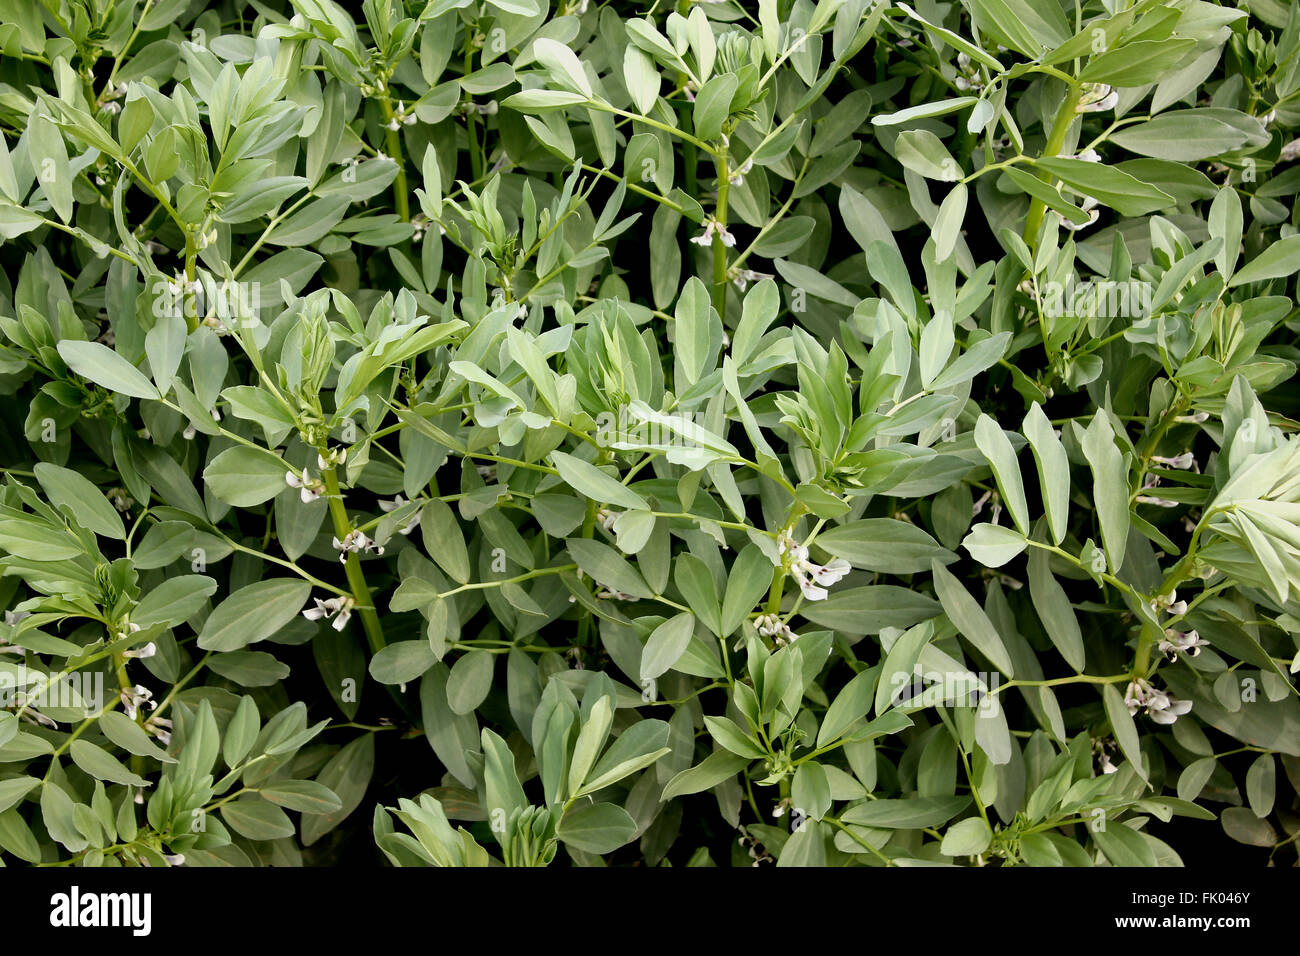 Vicia faba, Broad bean, faba bean, fava bean, cultivated herb with pinnate leaves, creamish-white flowers, pods with seeds Stock Photo